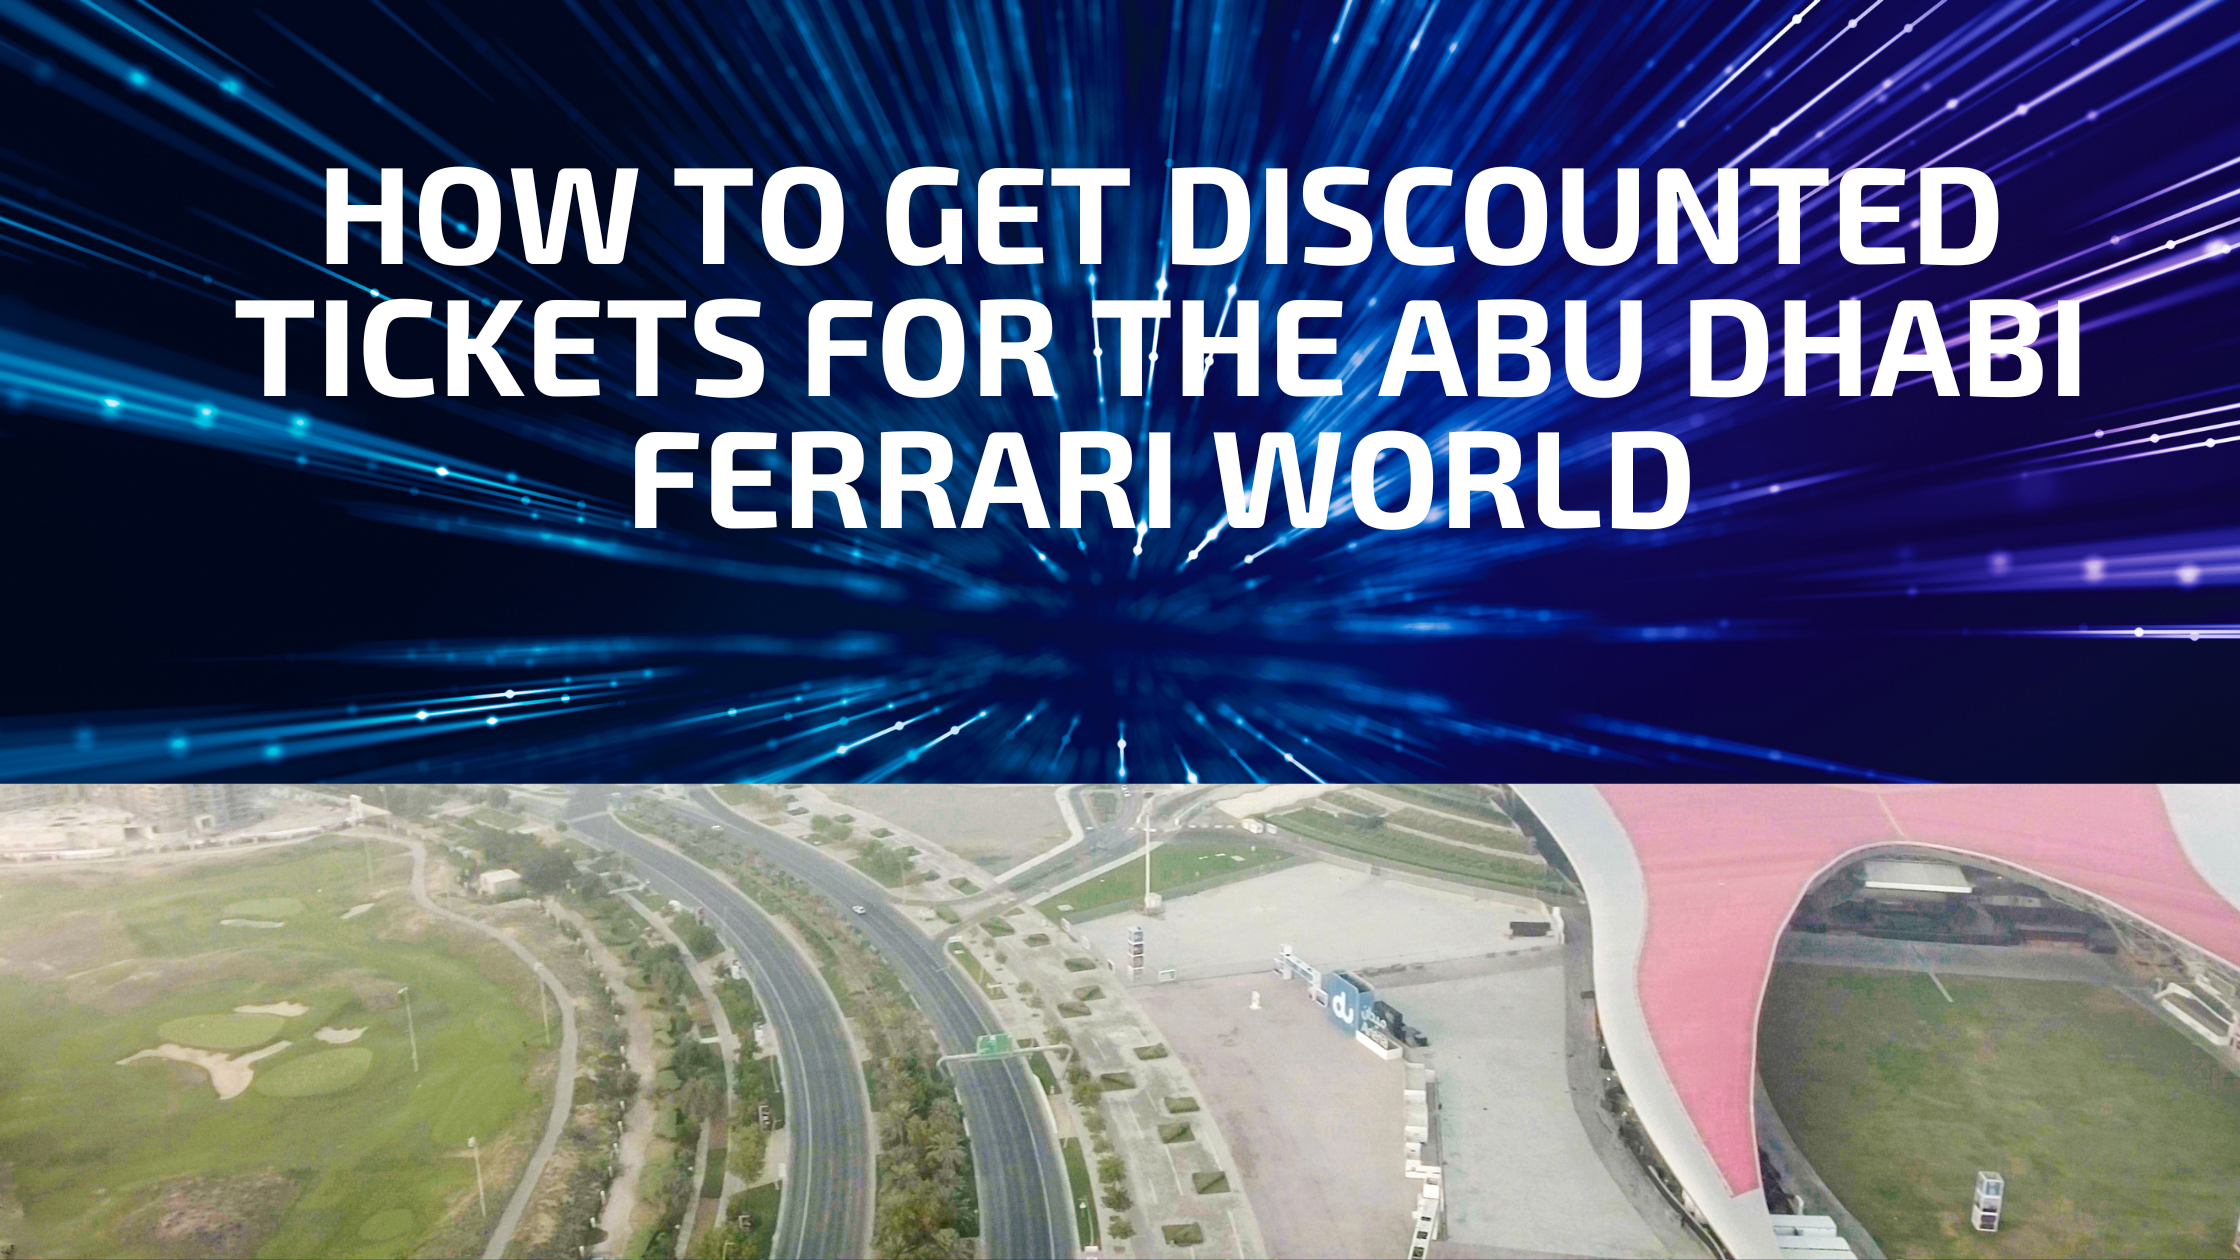 How To Get Discounted Tickets For The Abu Dhabi Ferrari World￼